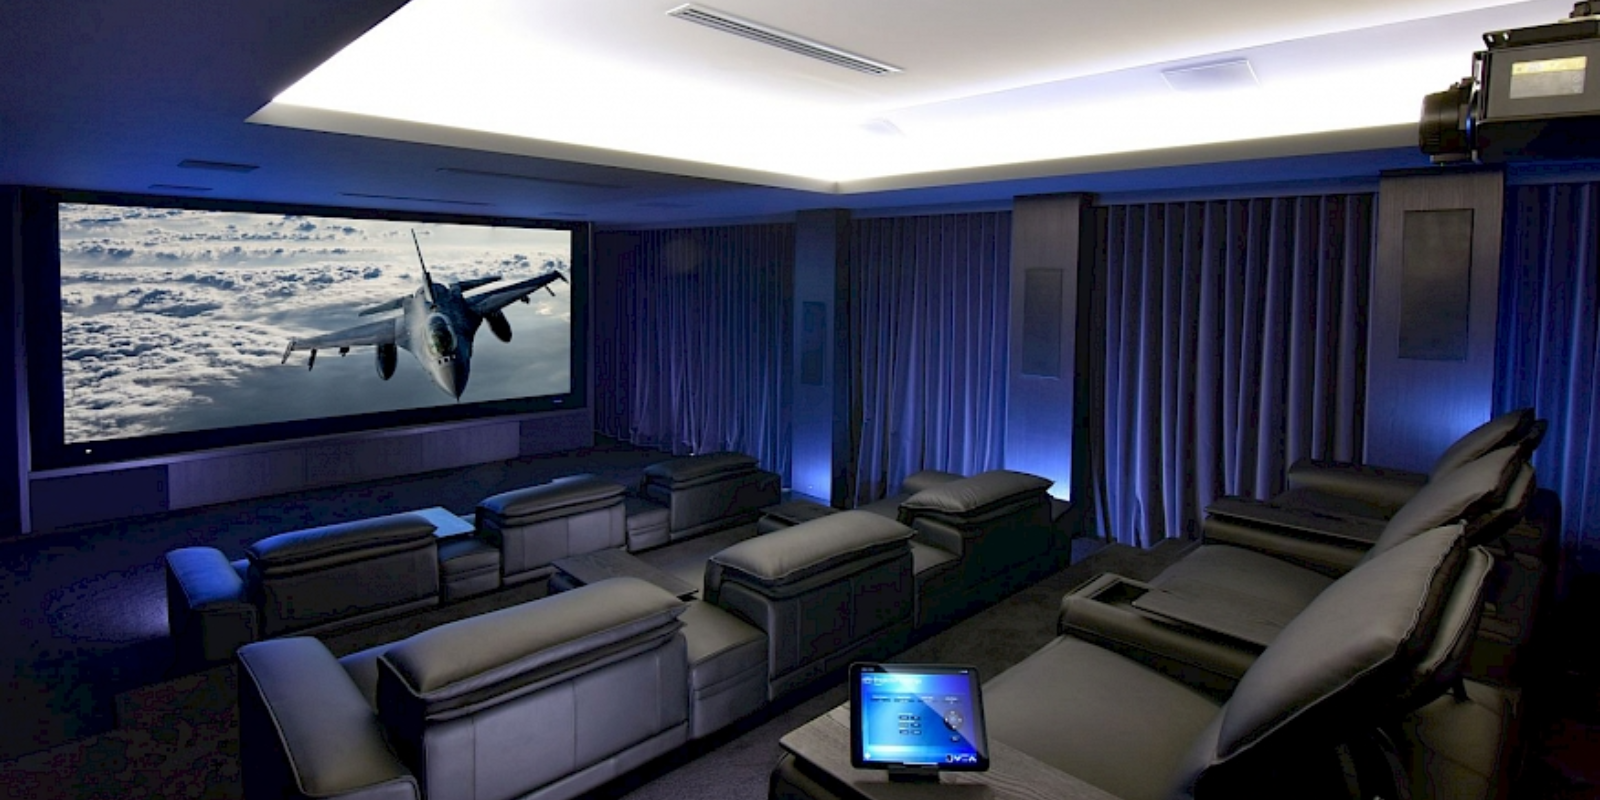 Choosing the Right Video Projector.